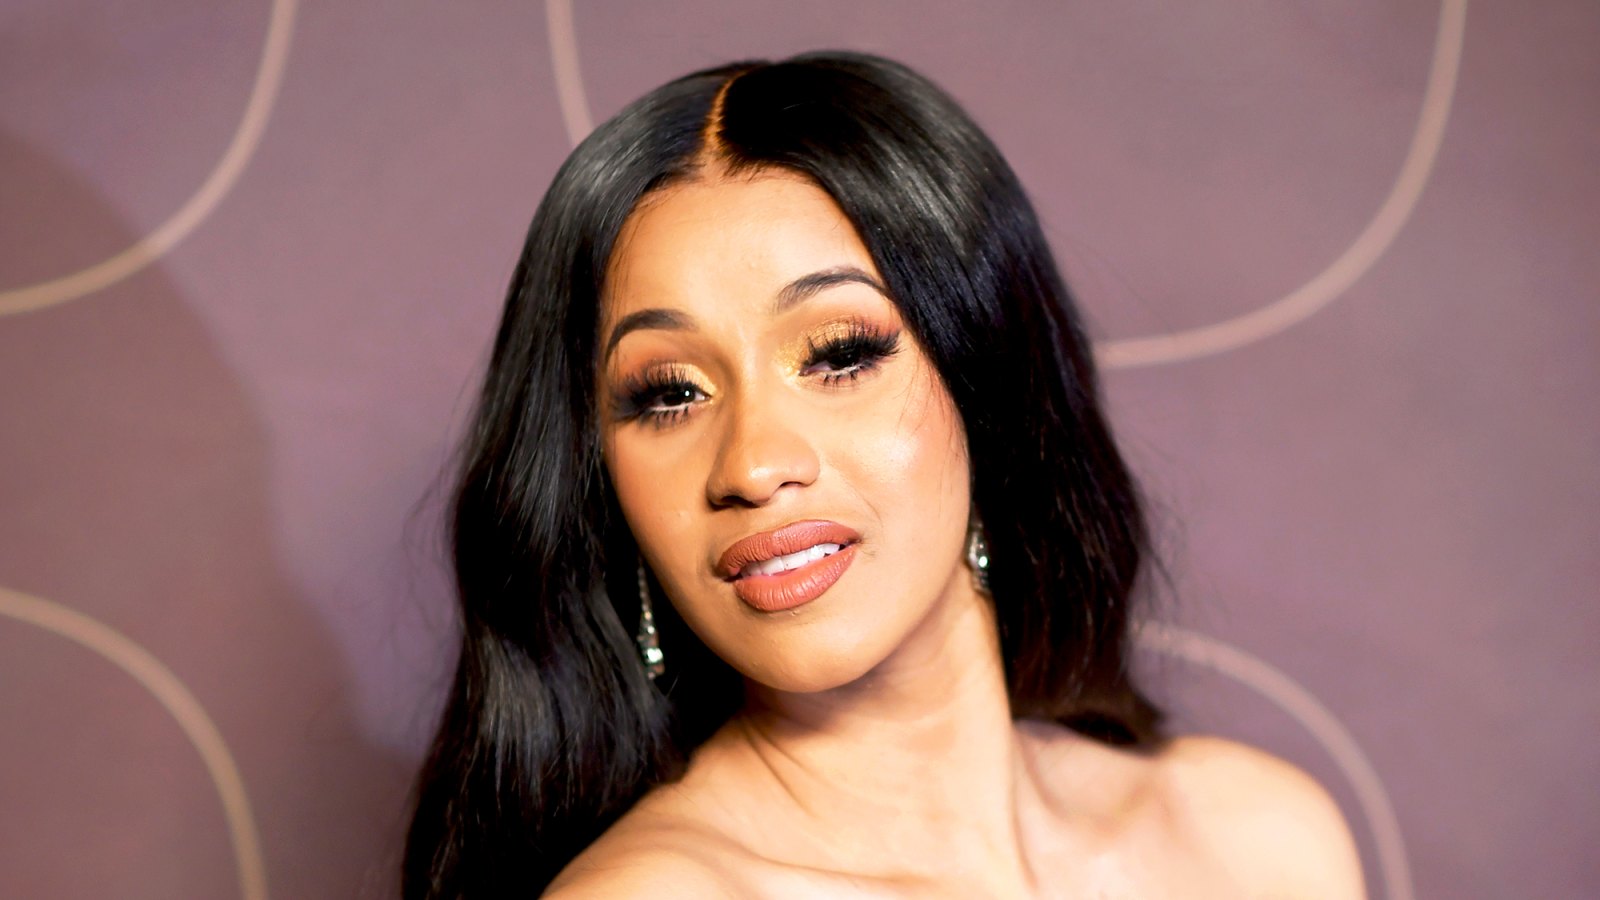 Cardi B attends the Warner Music Group Pre-Grammy Party in association with V Magazine on January 25, 2018 in New York City.